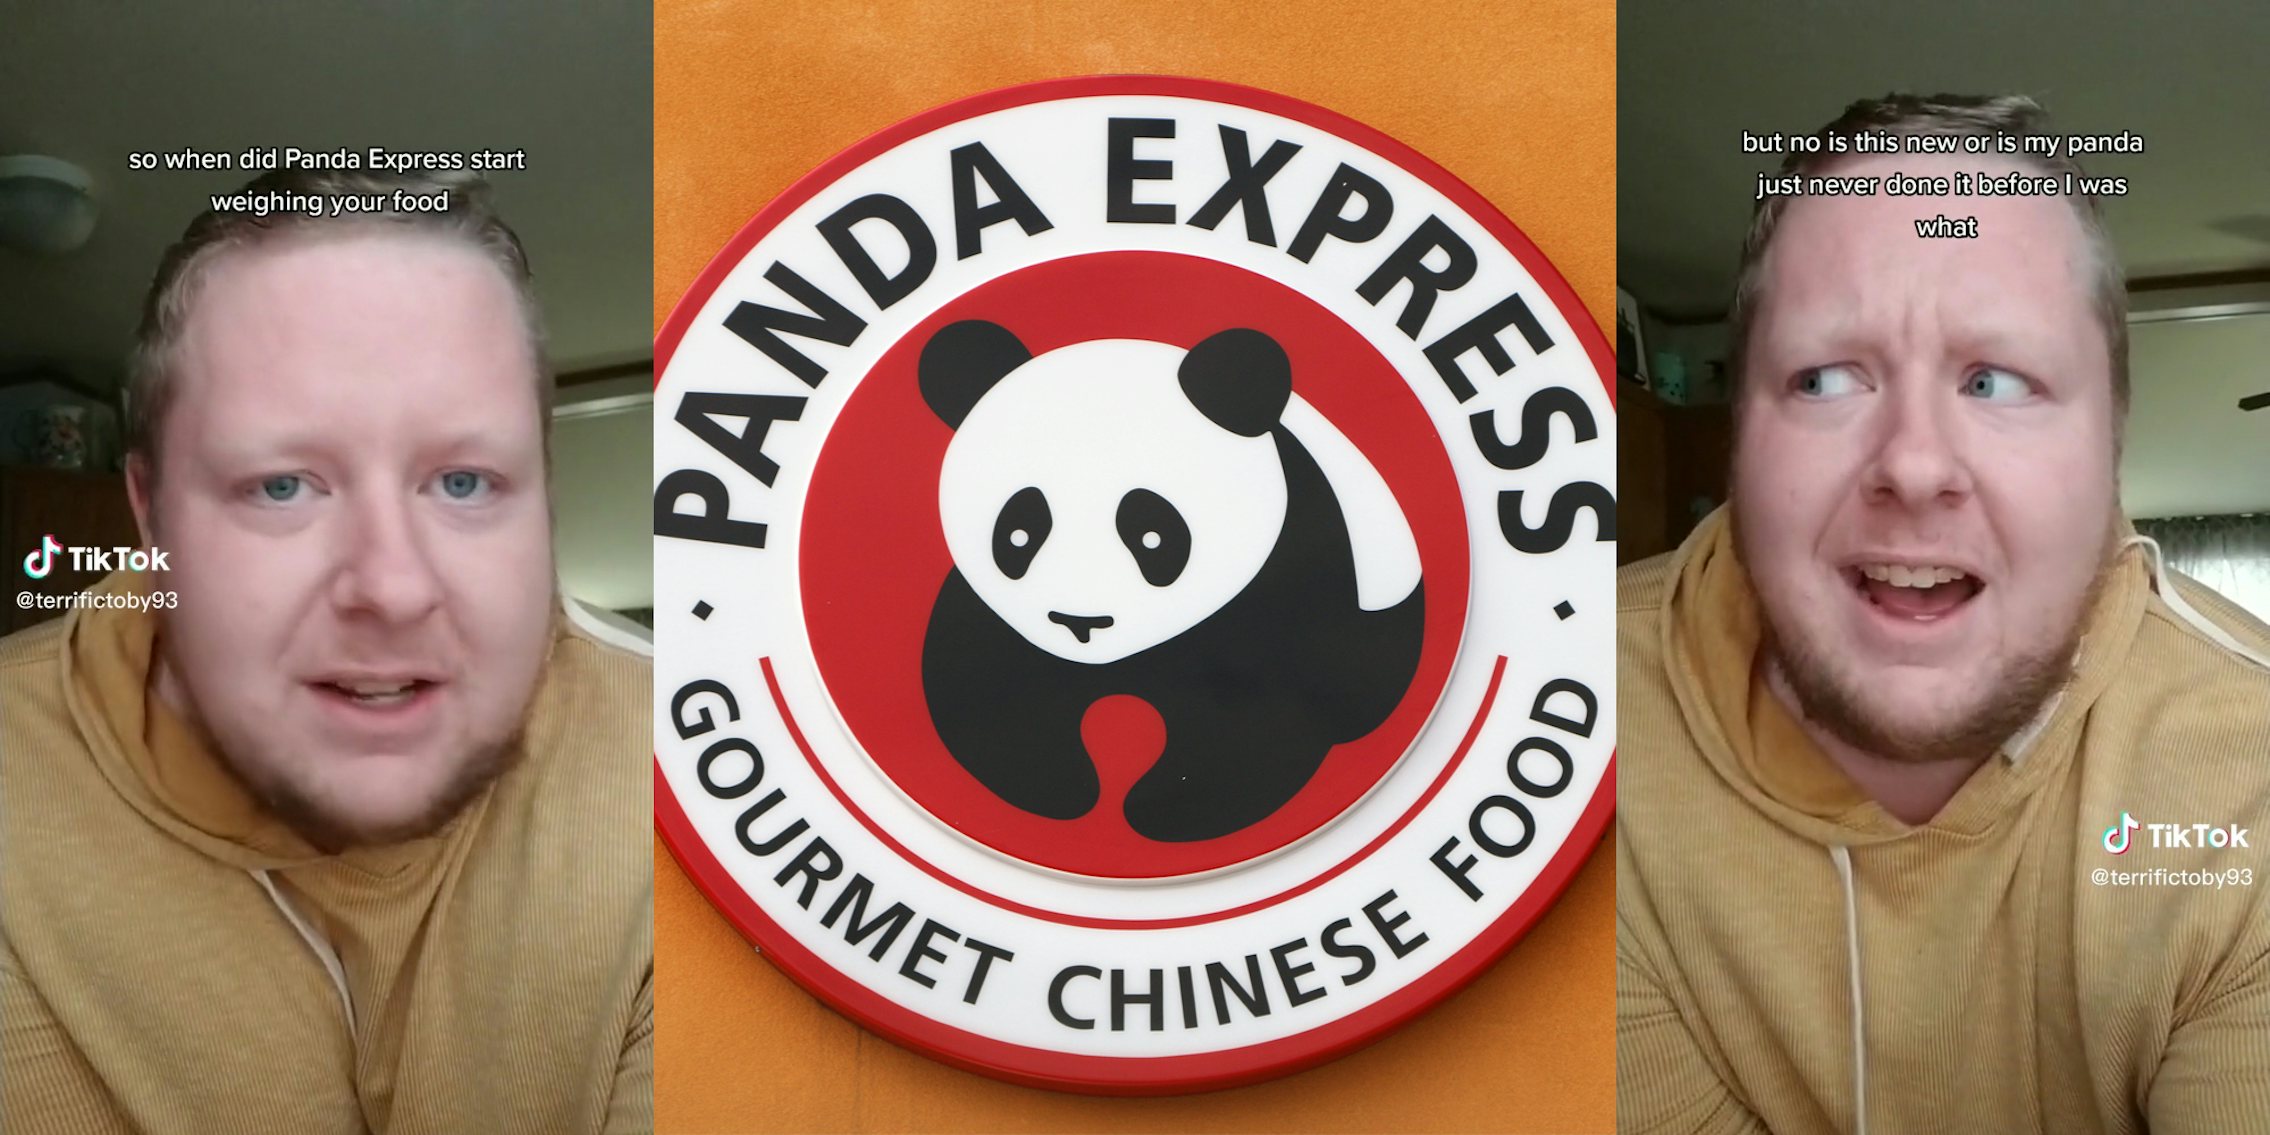 man with caption 'so when did Panda Express start weighing your food' and 'but no is this new or is my panda just never done it before I was what' (l&r) Panda Express sign (c)